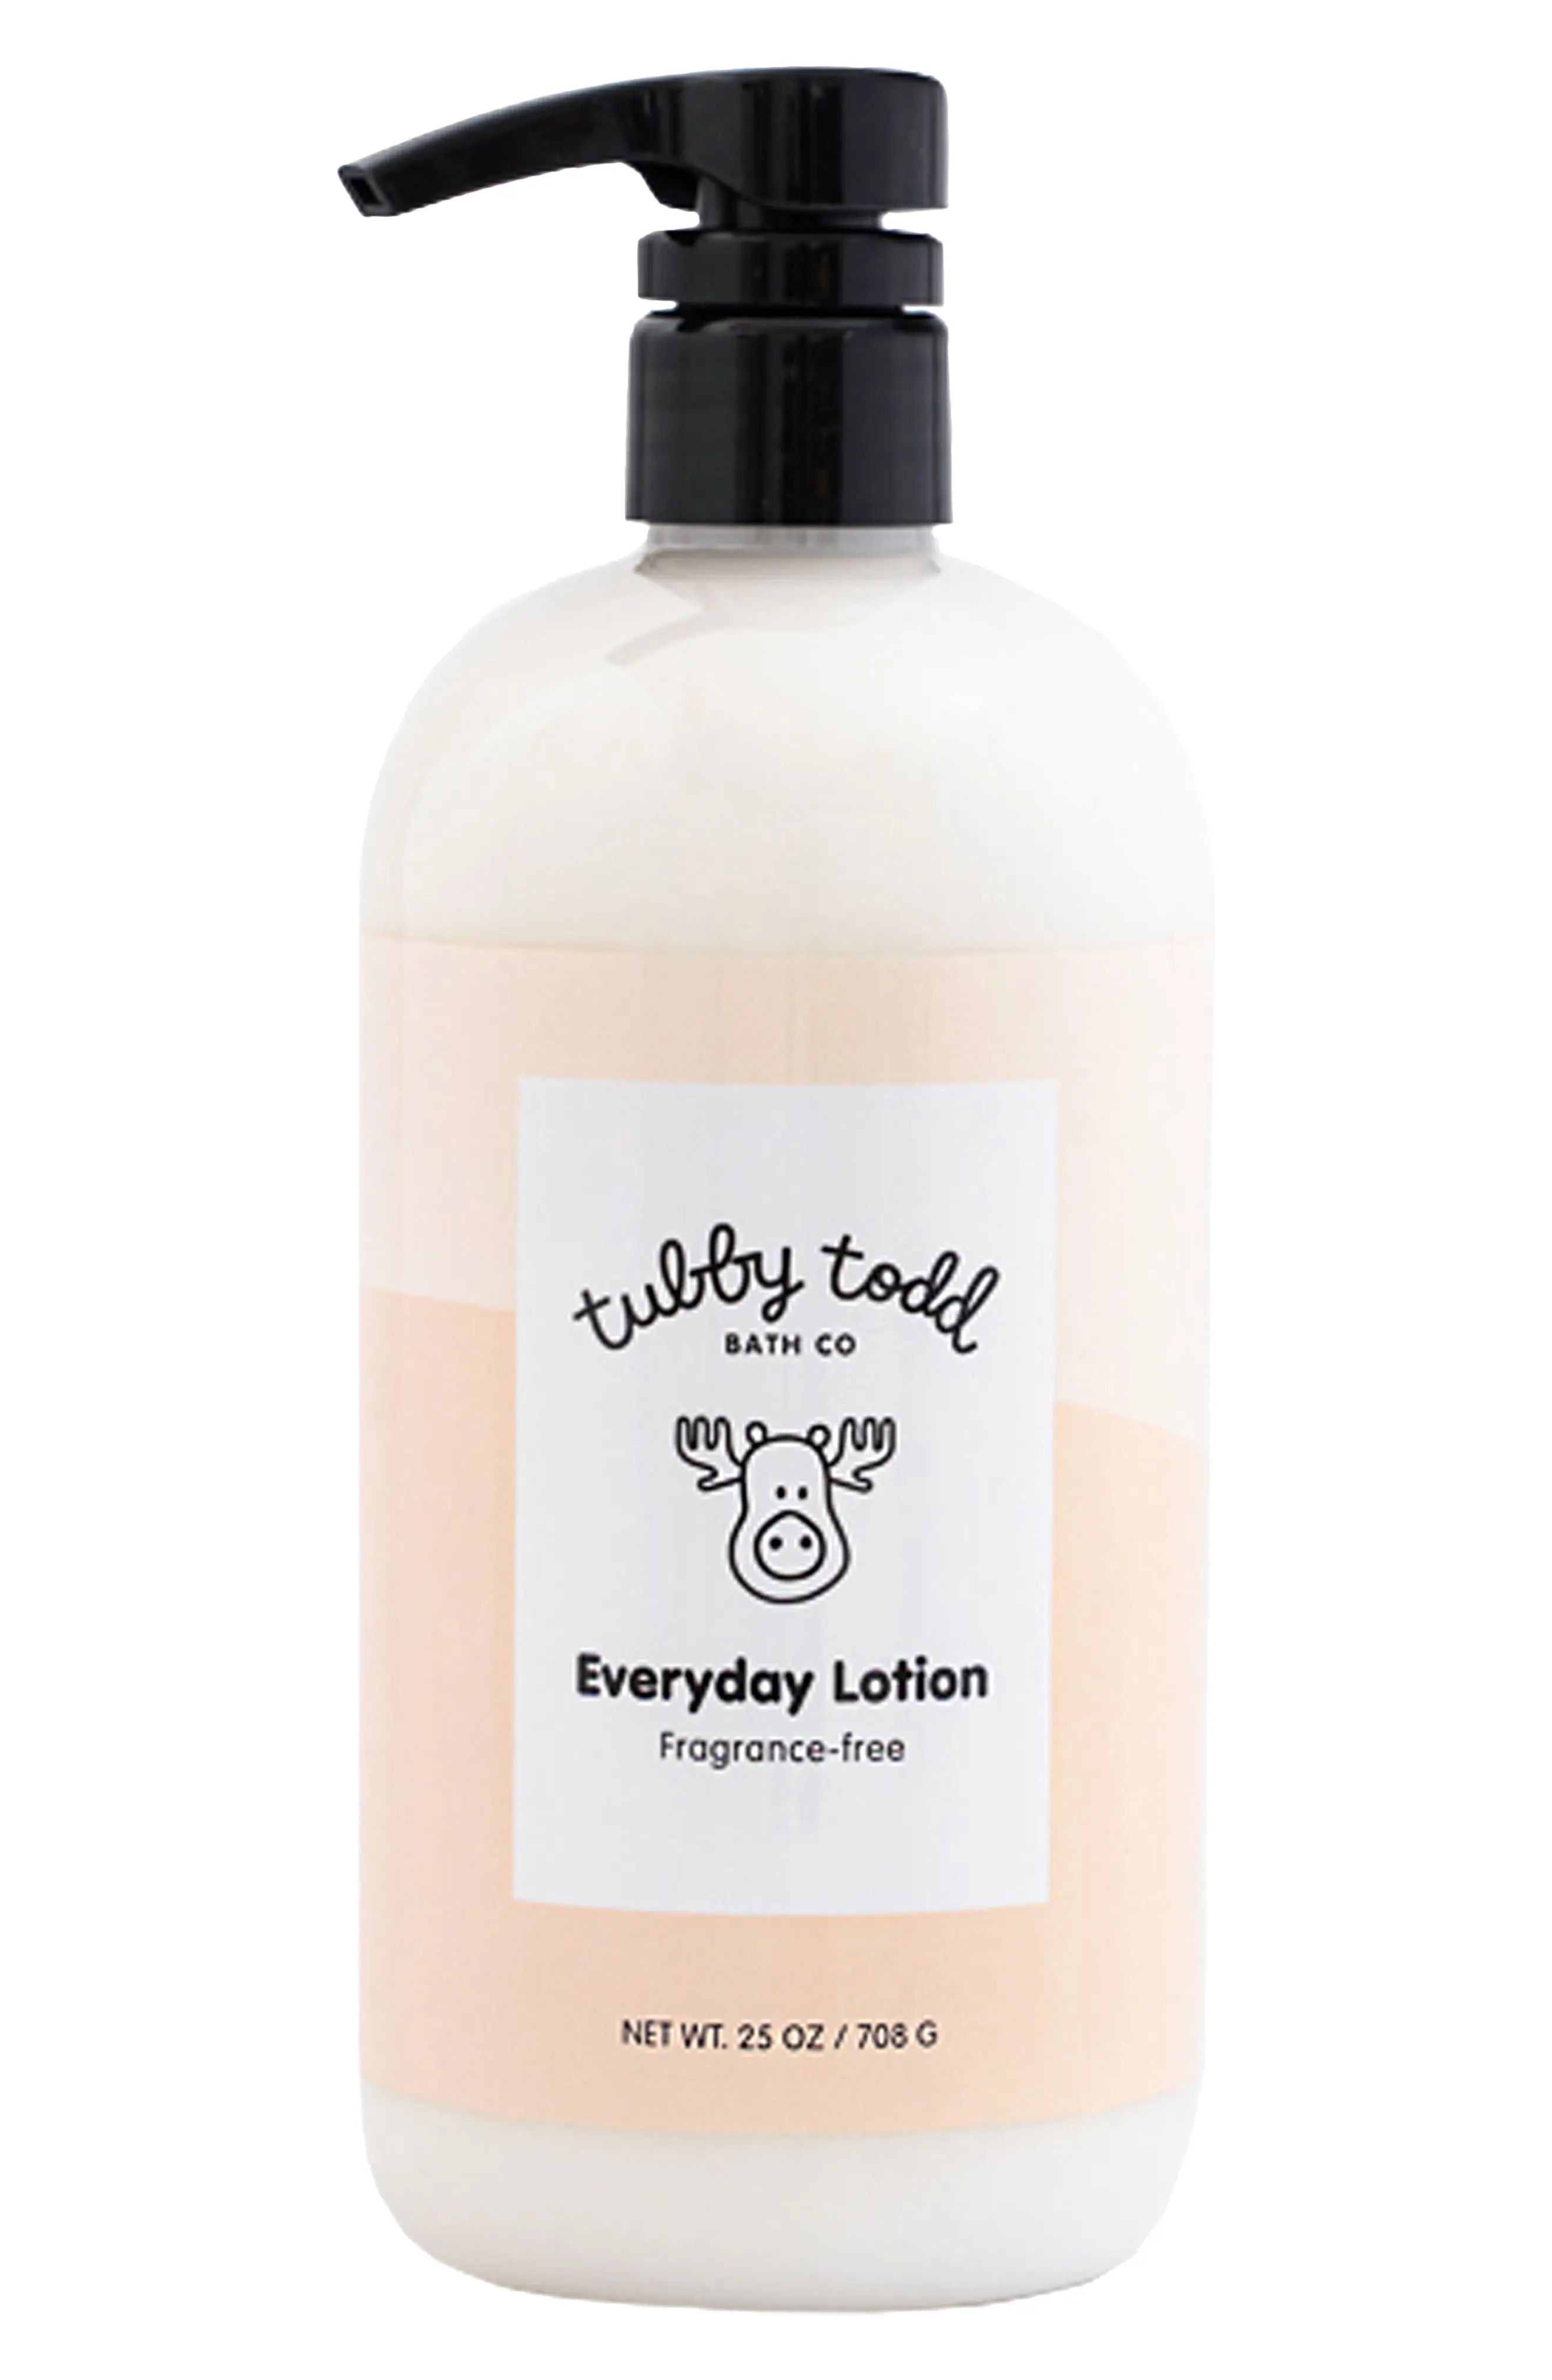 Tubby Todd Bath Co. Everyday Lotion in Fragrance-Free at Nordstrom | Nordstrom